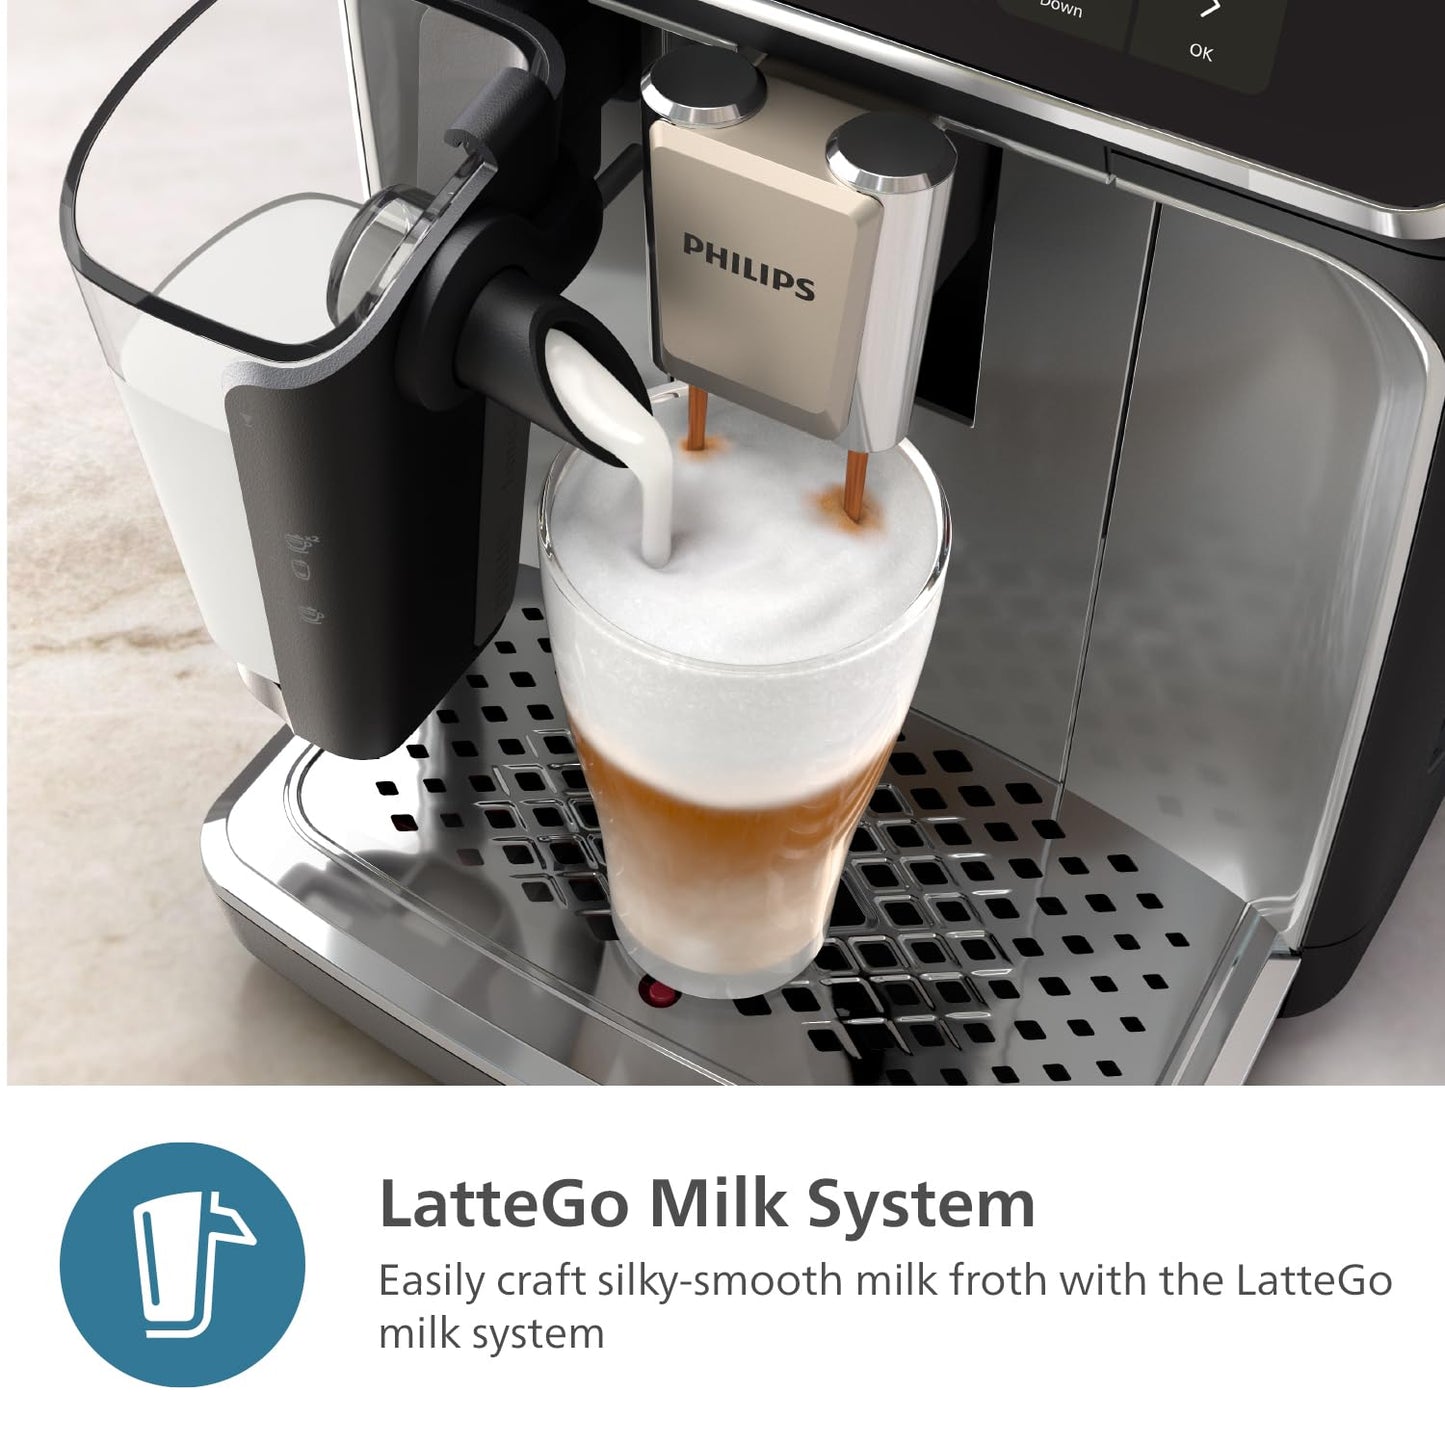 PHILIPS Series 4400 Fully Automatic LatteGo Espresso Machine, SilentBrew Technology, Quick Start. Aromatic Coffee from Freshly Ground Beans, 12 Hot and Iced Drinks, Black Chrome (EP4444/90)